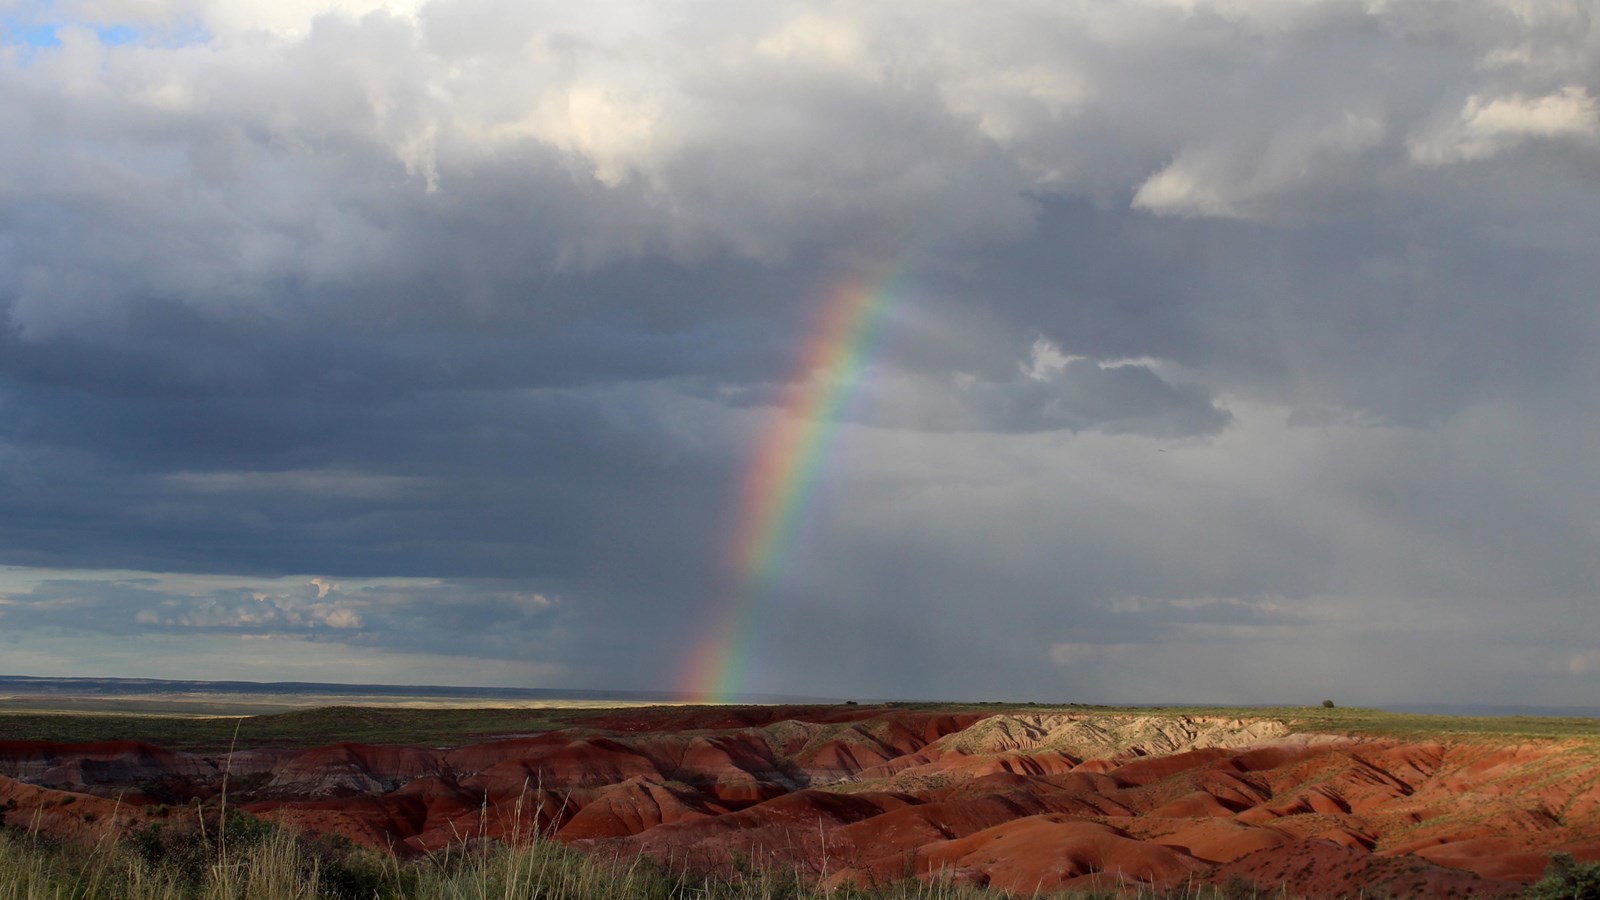 Red badlands and grassland with cloudy sky and rainbow.